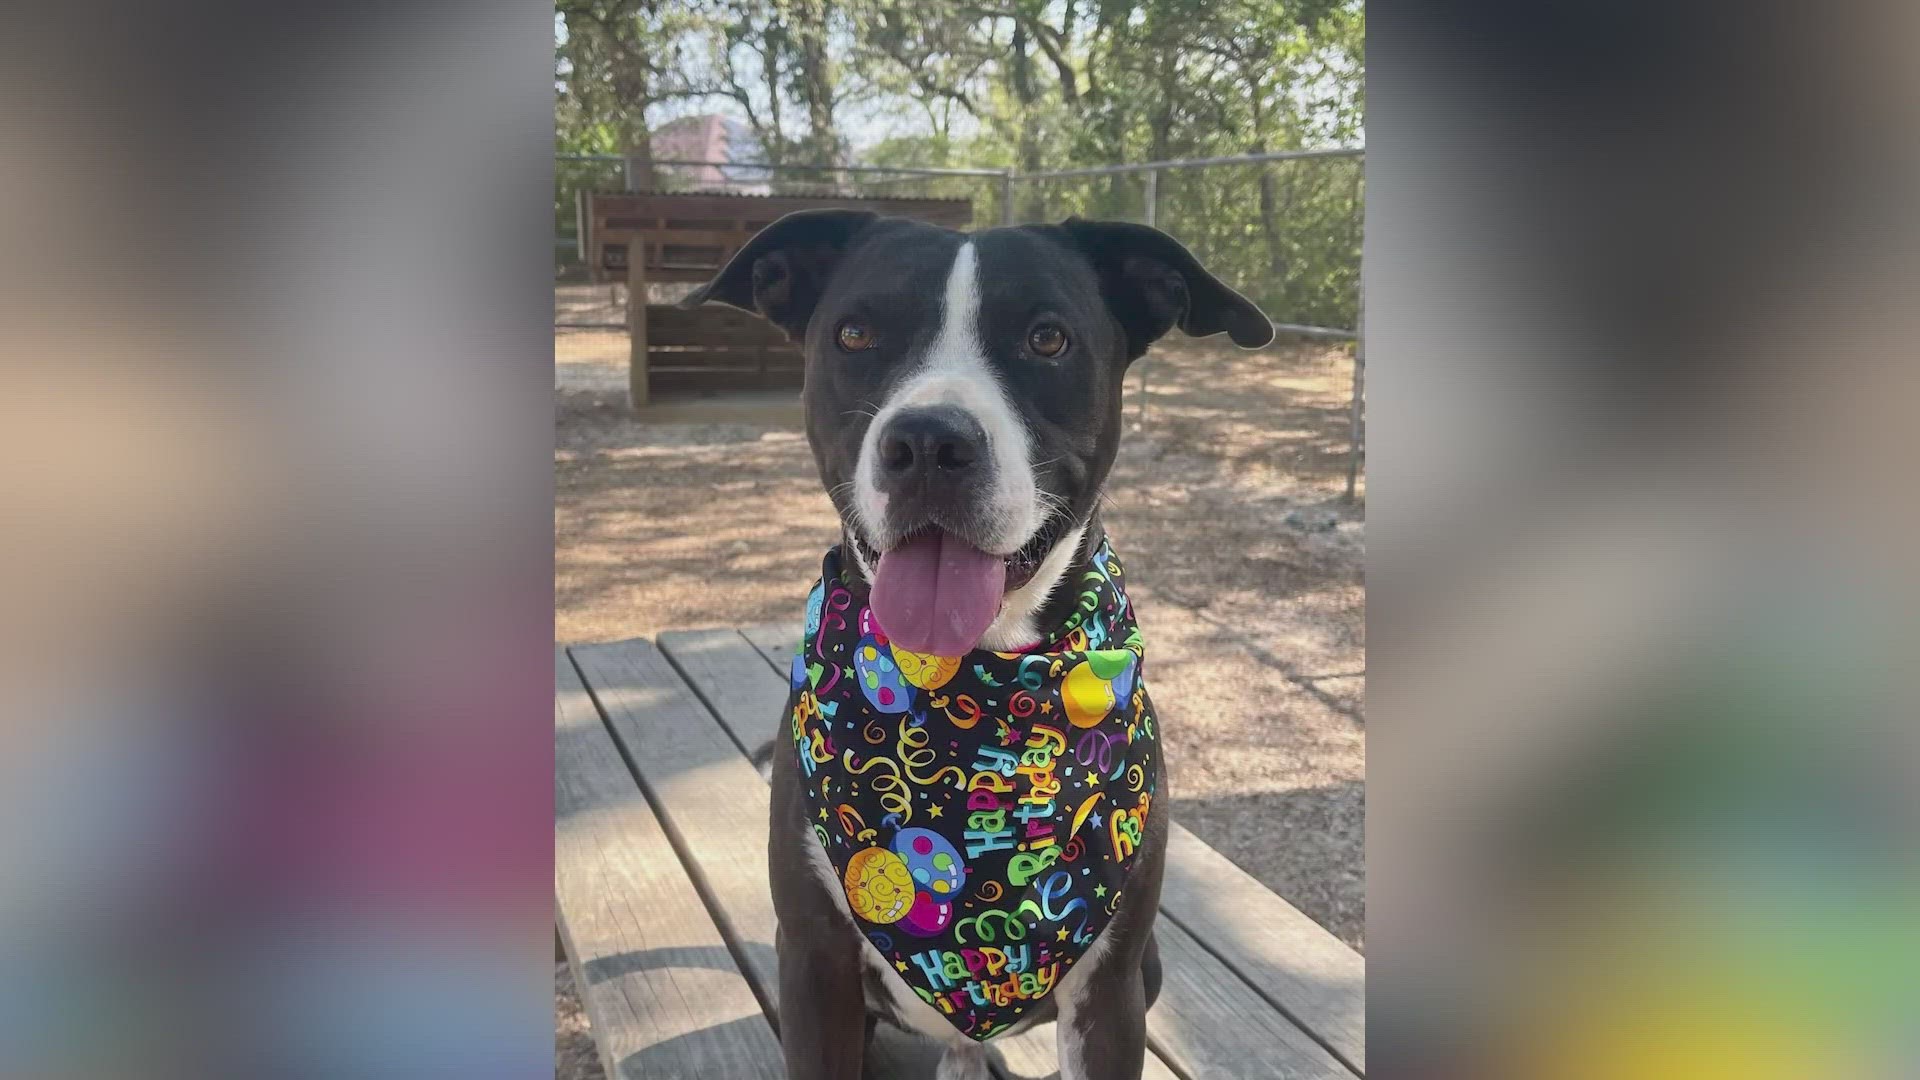 Rescued dog is happy, thriving and learning, Local News